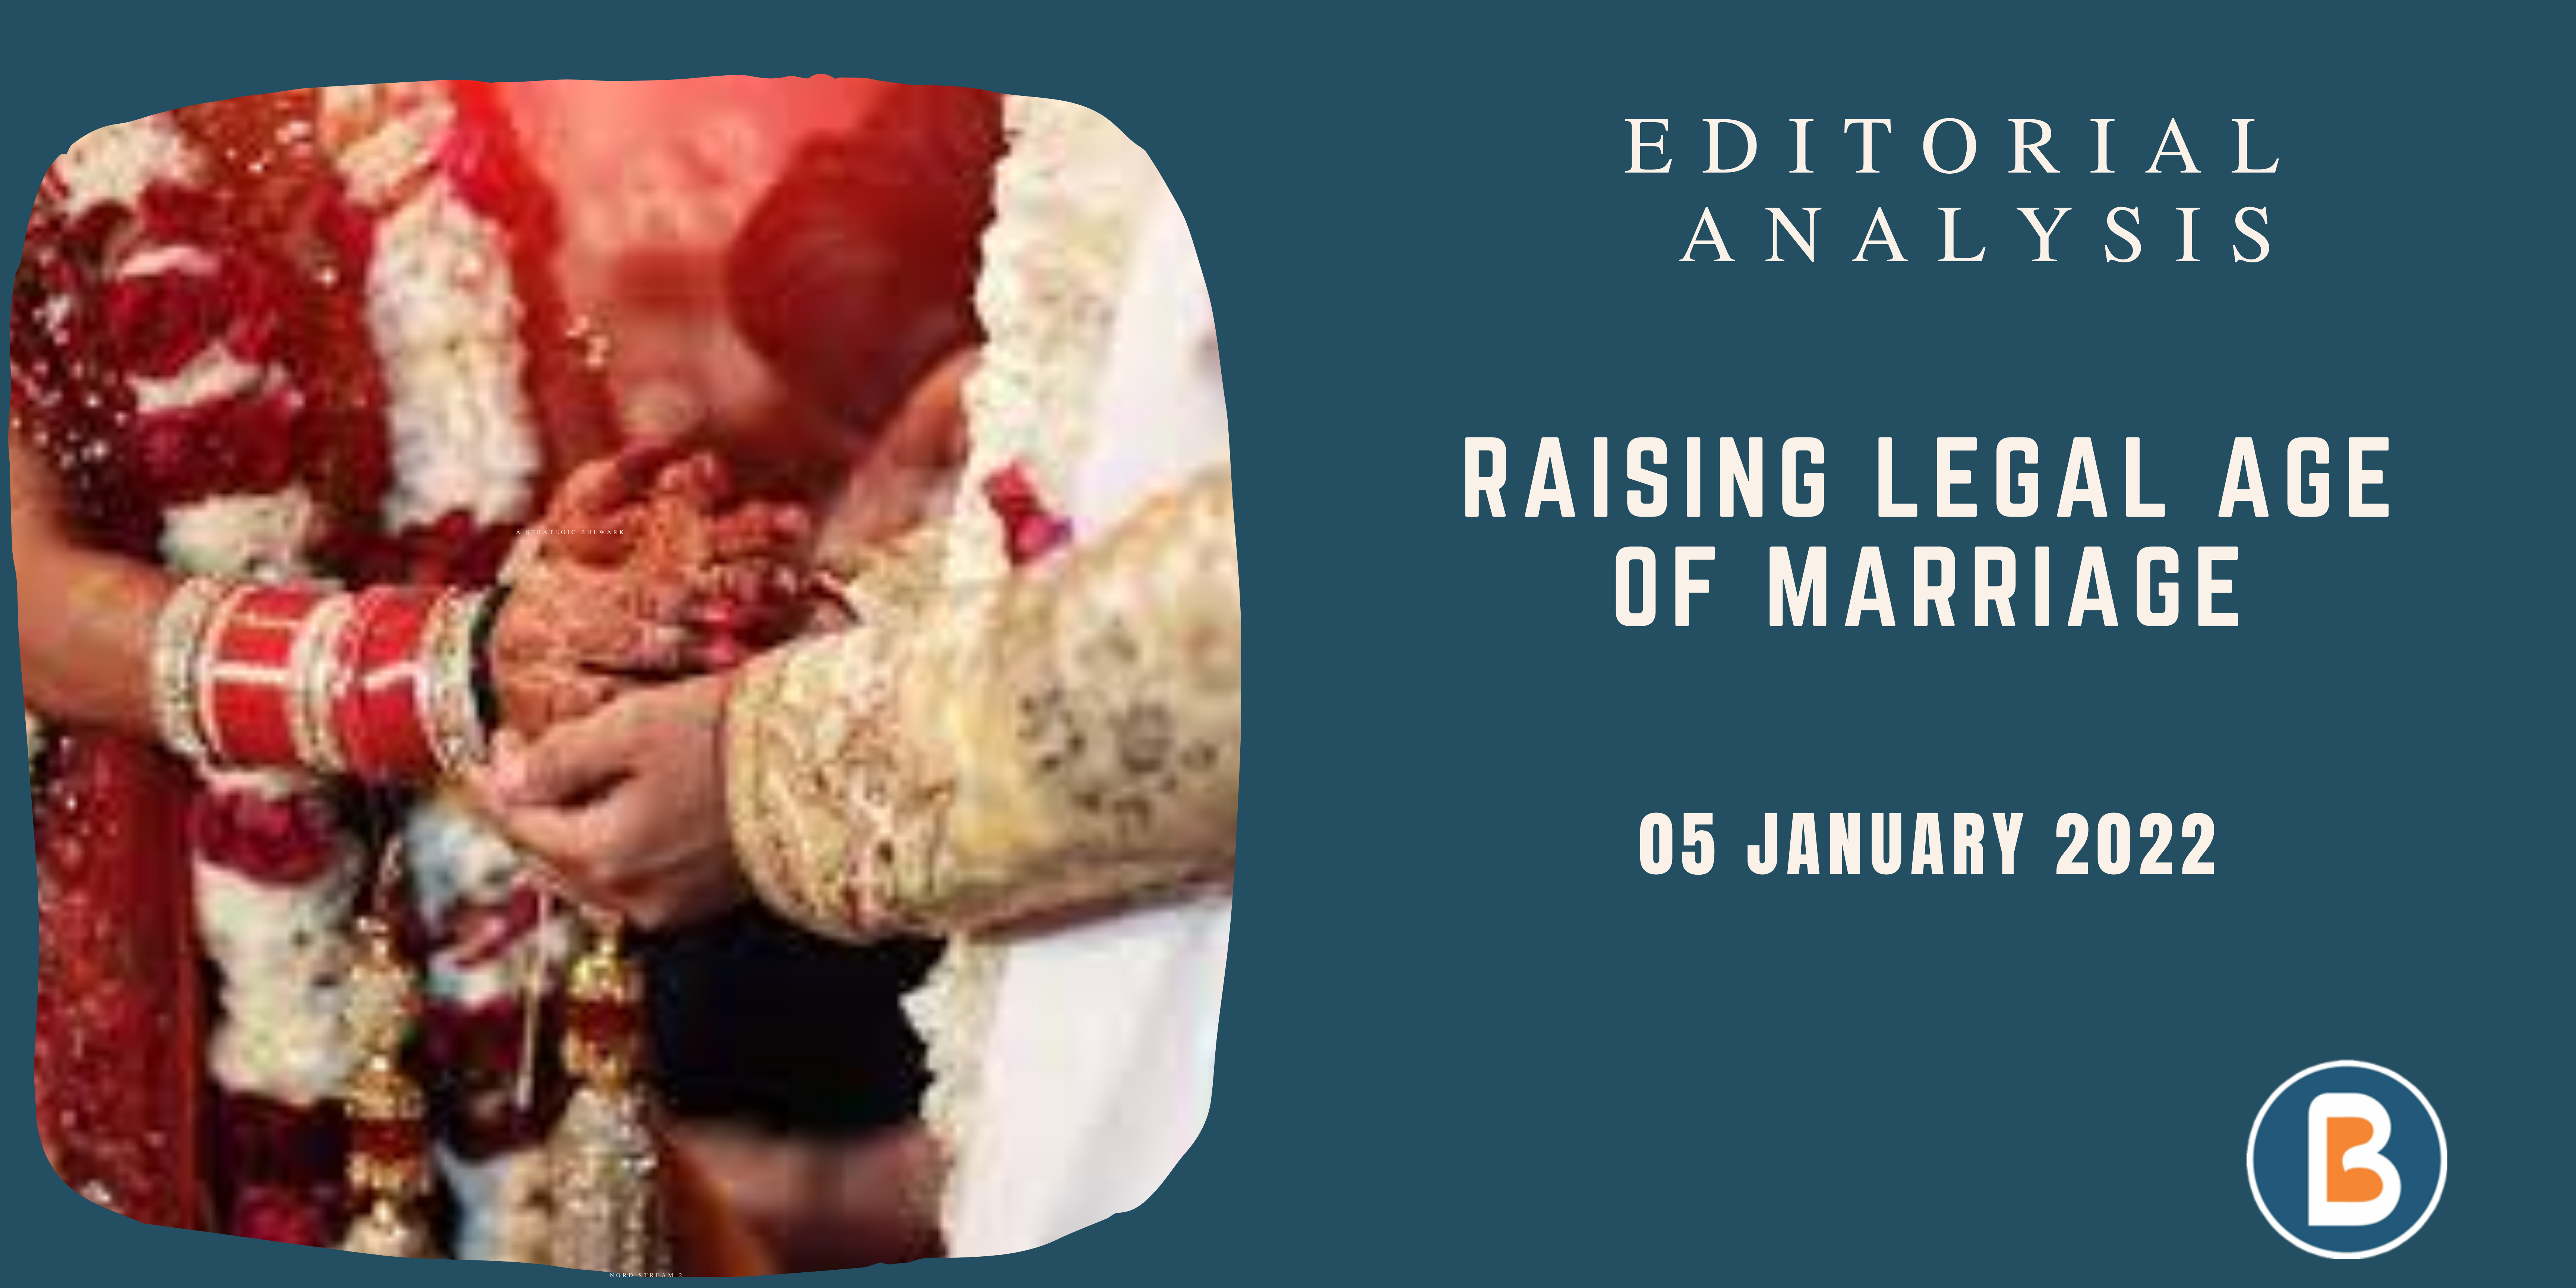 Editorial Analysis for IAS - RAISING LEGAL AGE OF MARRIAGE